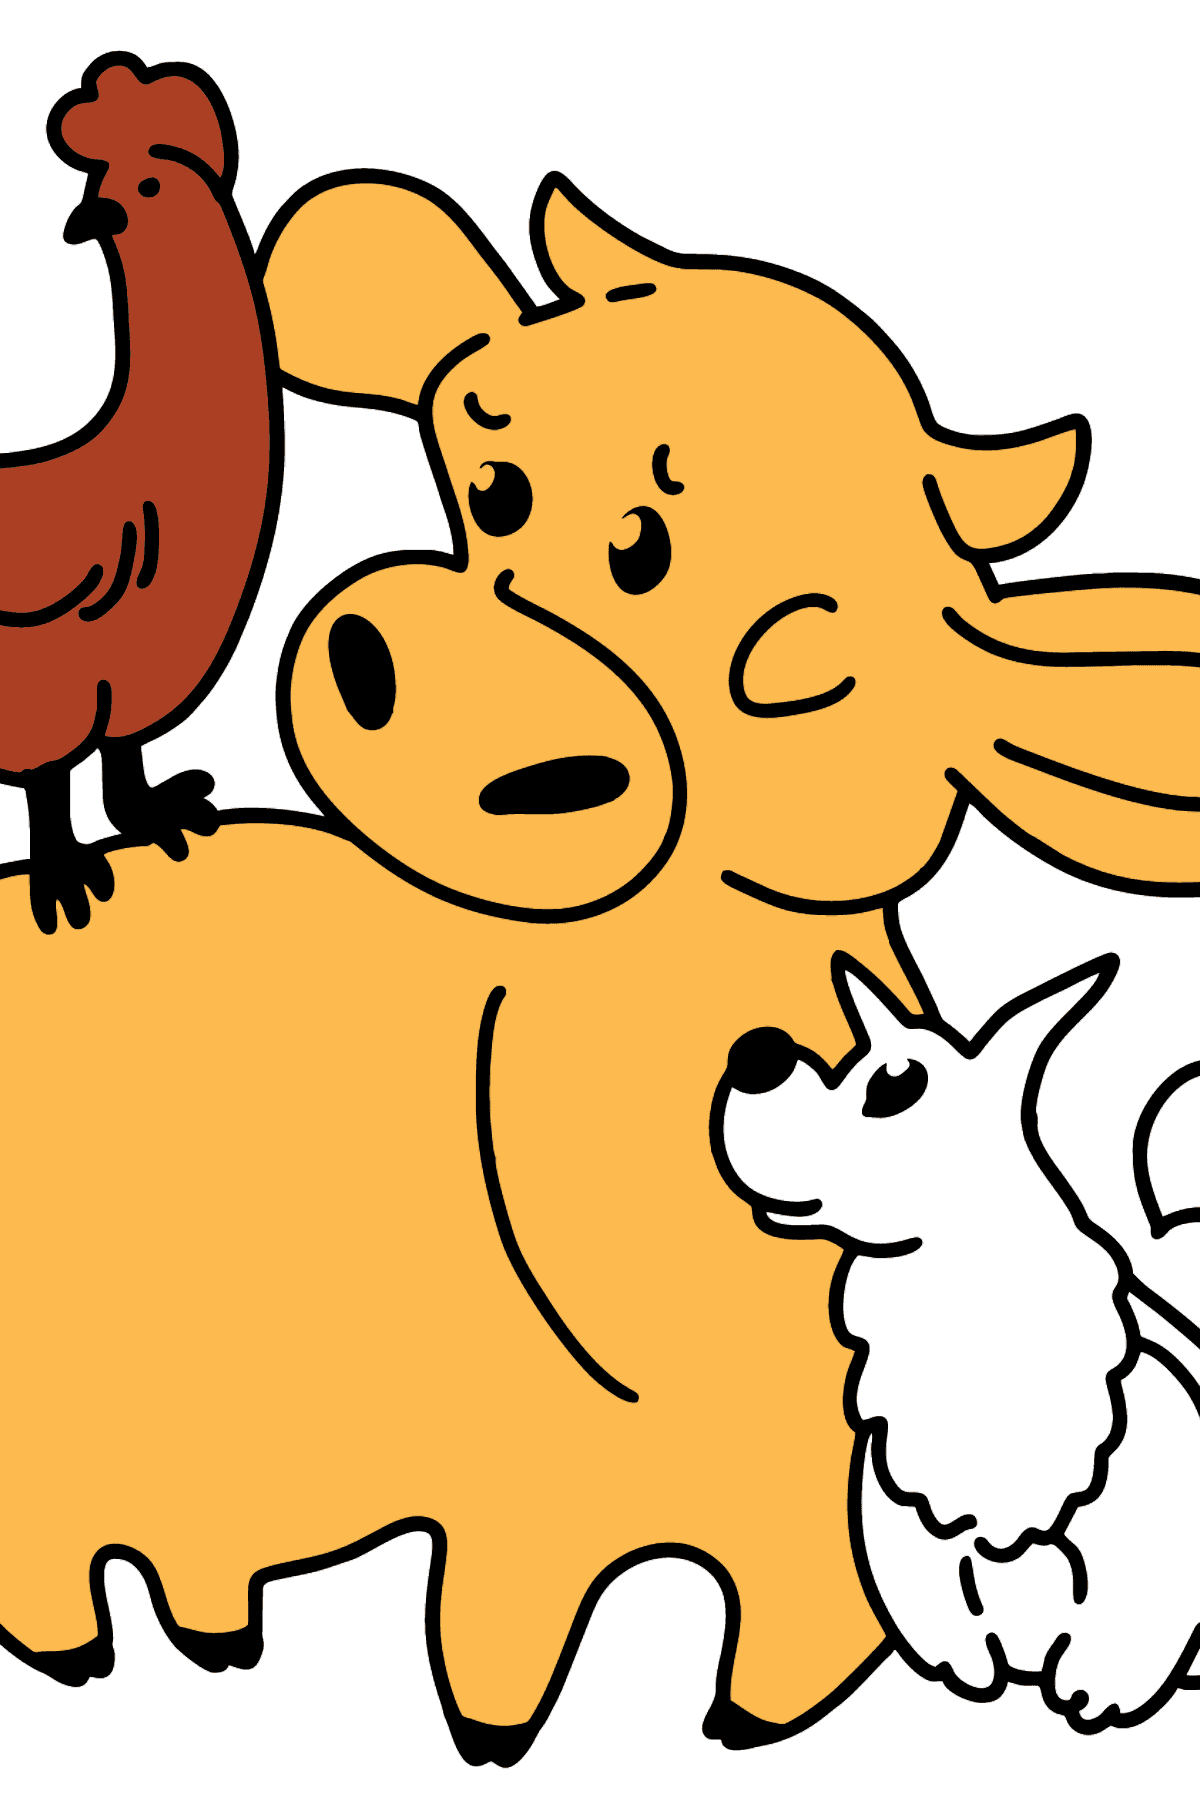 Coloring page: calf, chicken, and dog - Coloring Pages for Kids